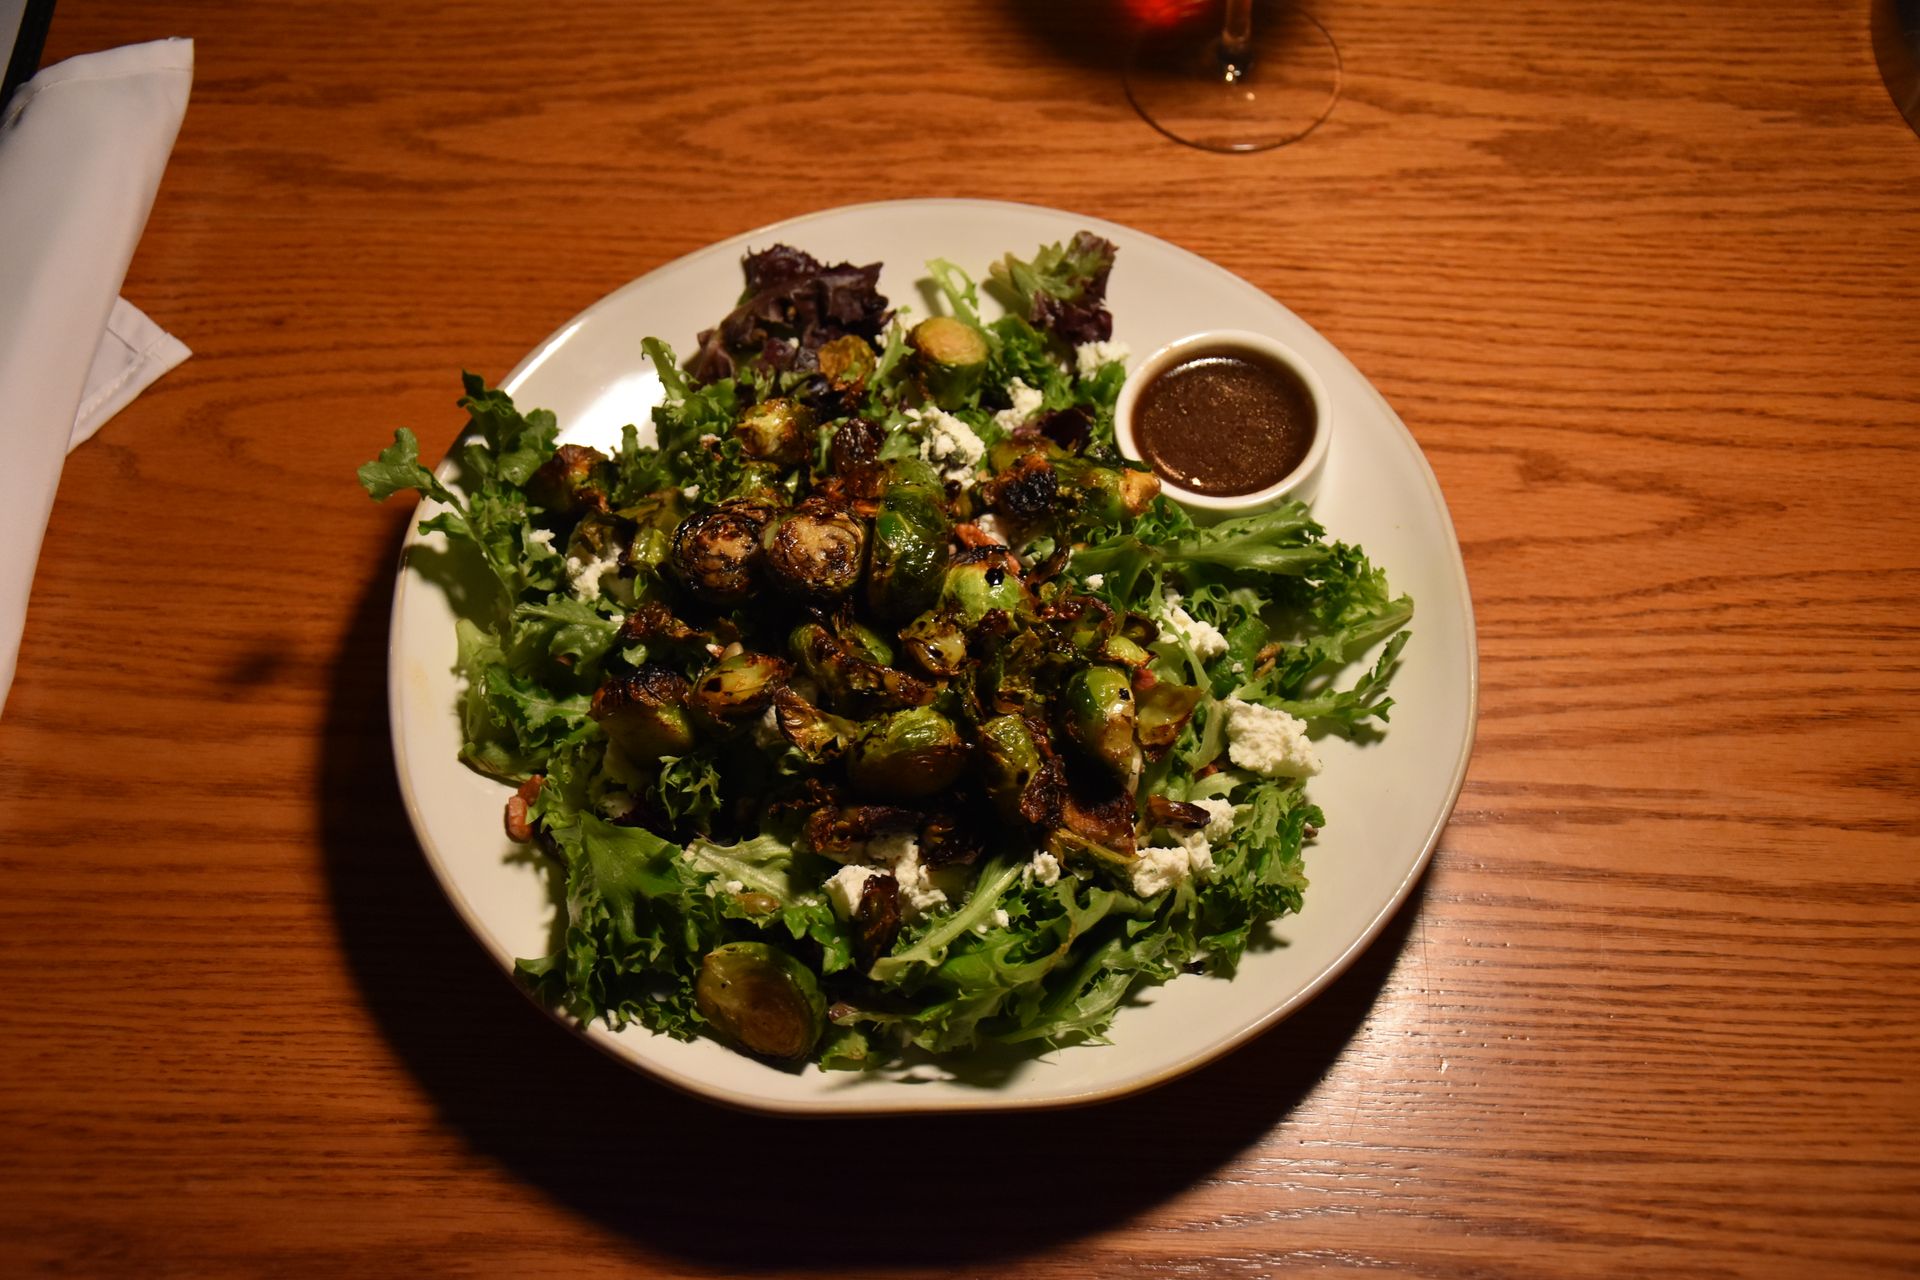 Brussel sprout salad with dressing on white plate on a wooden table.